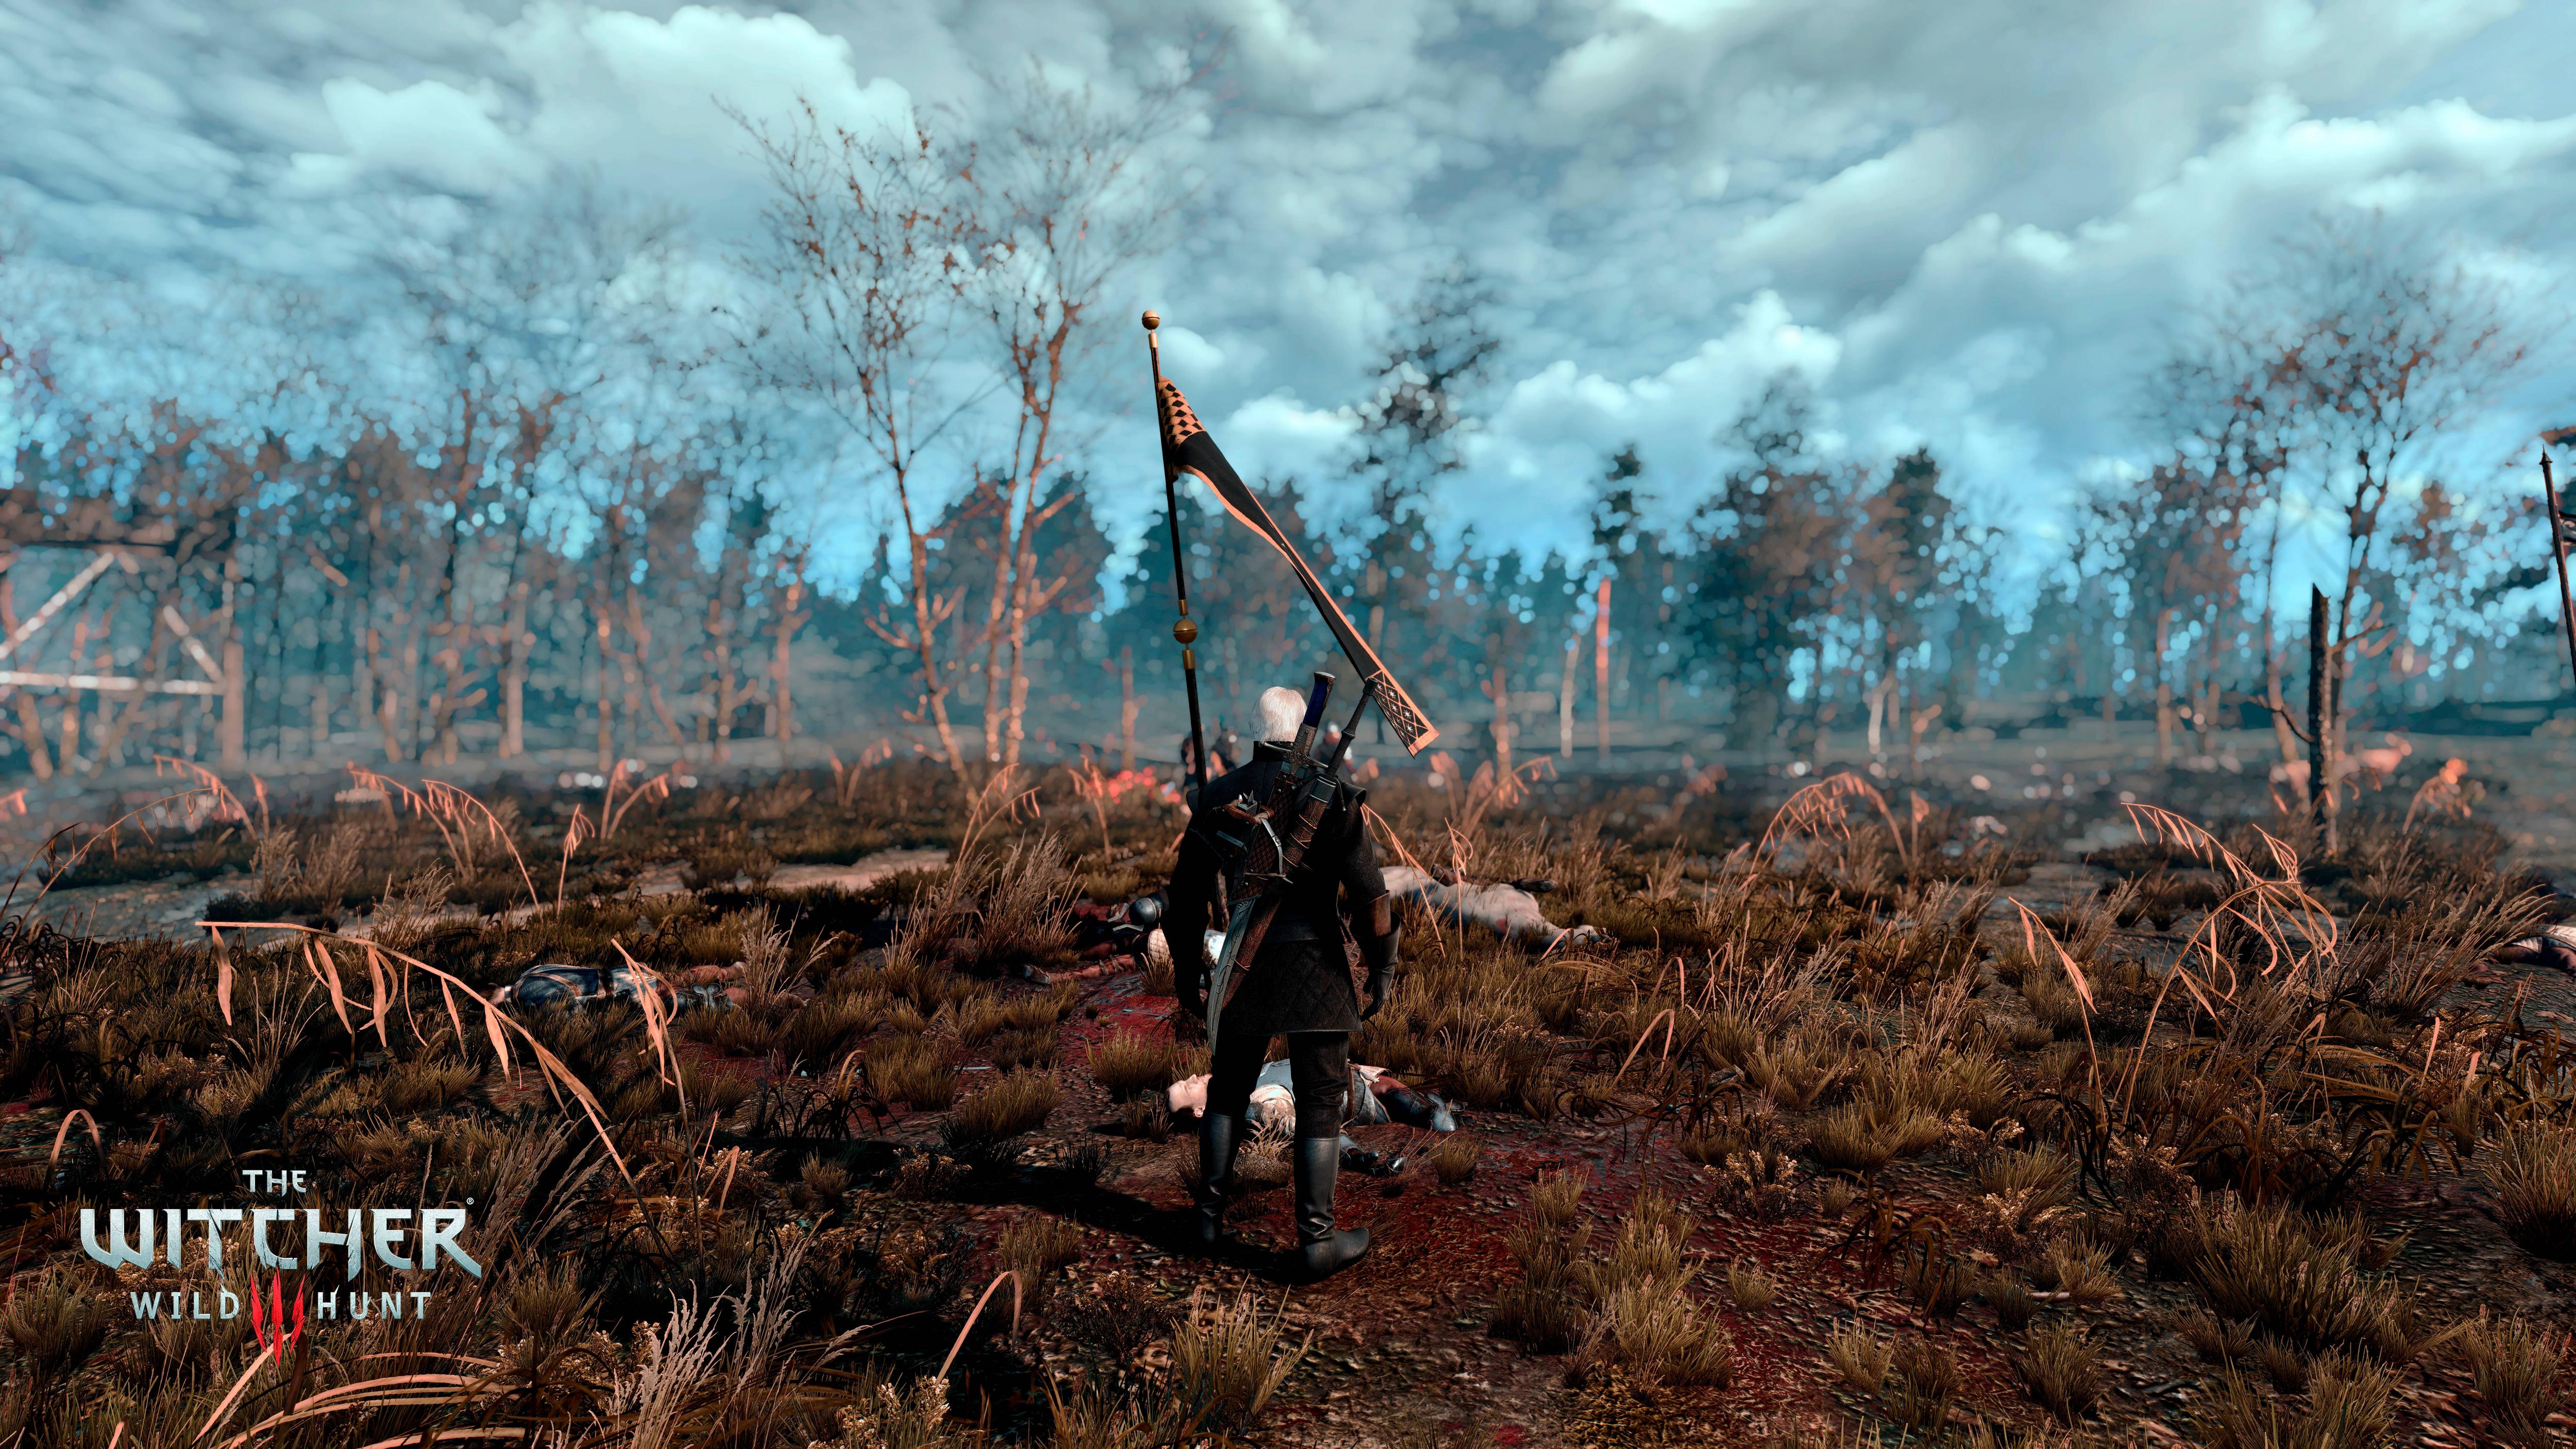 Witcher 3 Wallpaper The Witcher - Witcher - 5000x2813 Wallpaper 